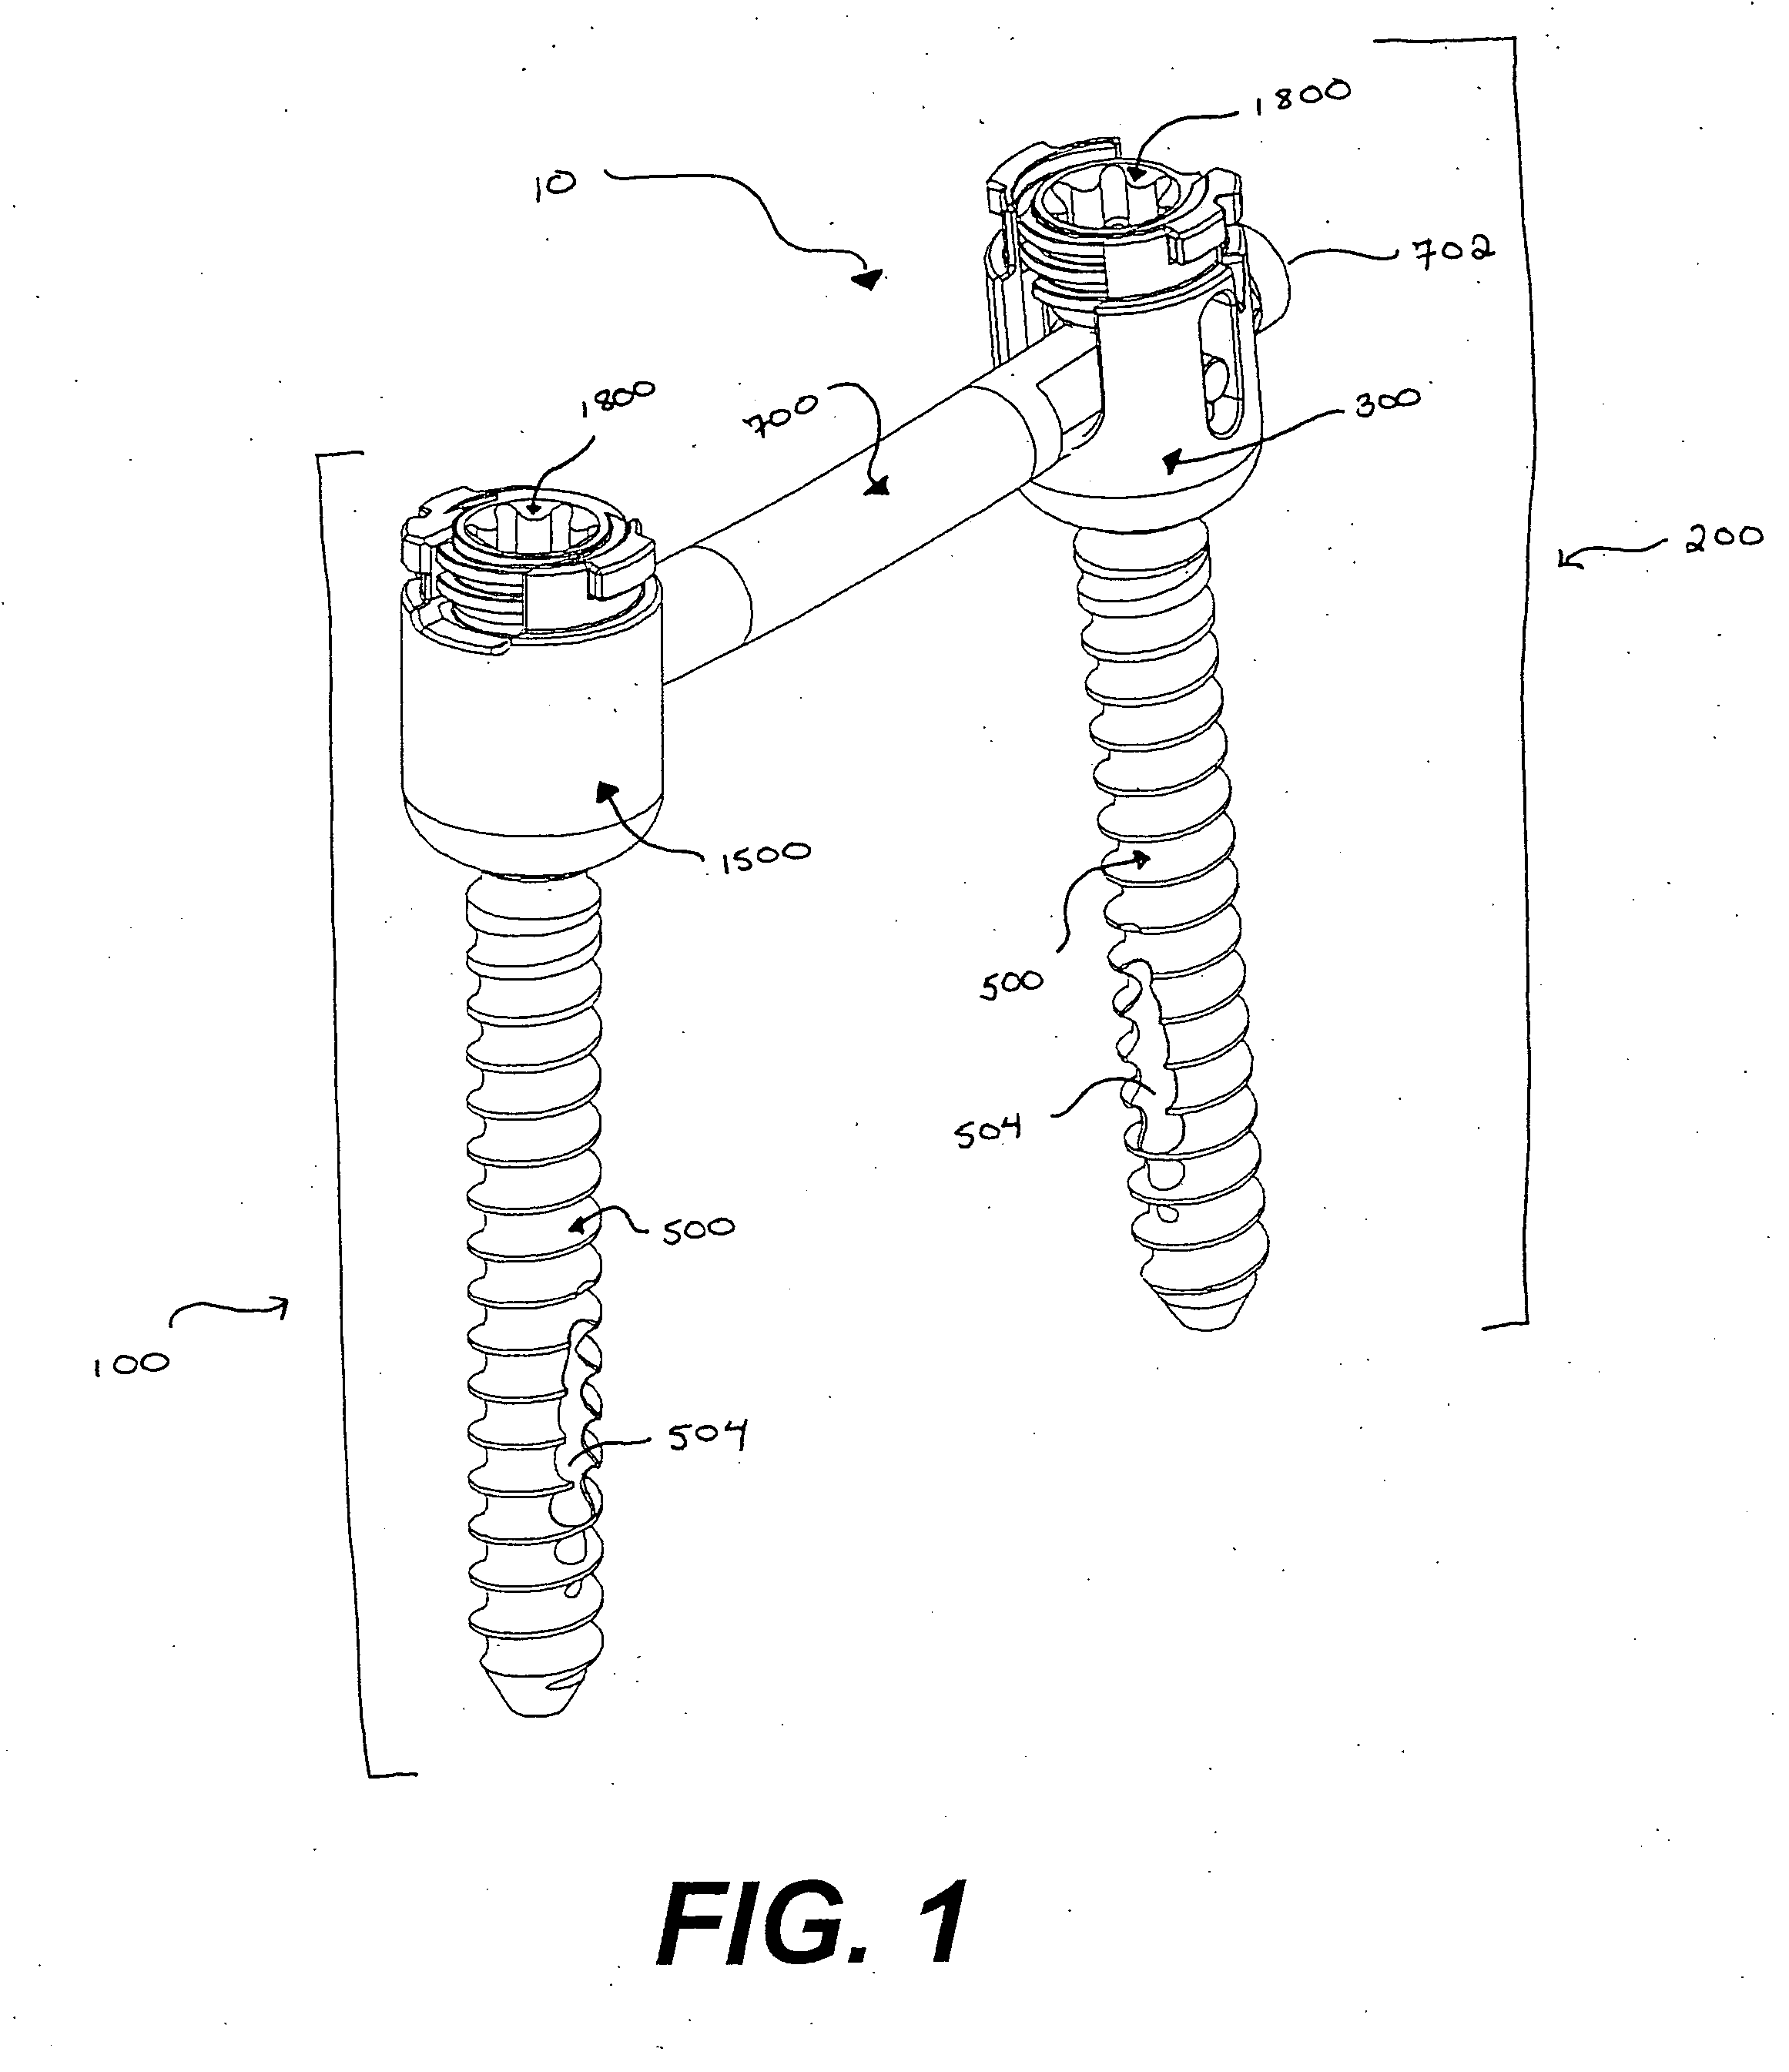 Connector transfer tool for internal structure stabilization systems